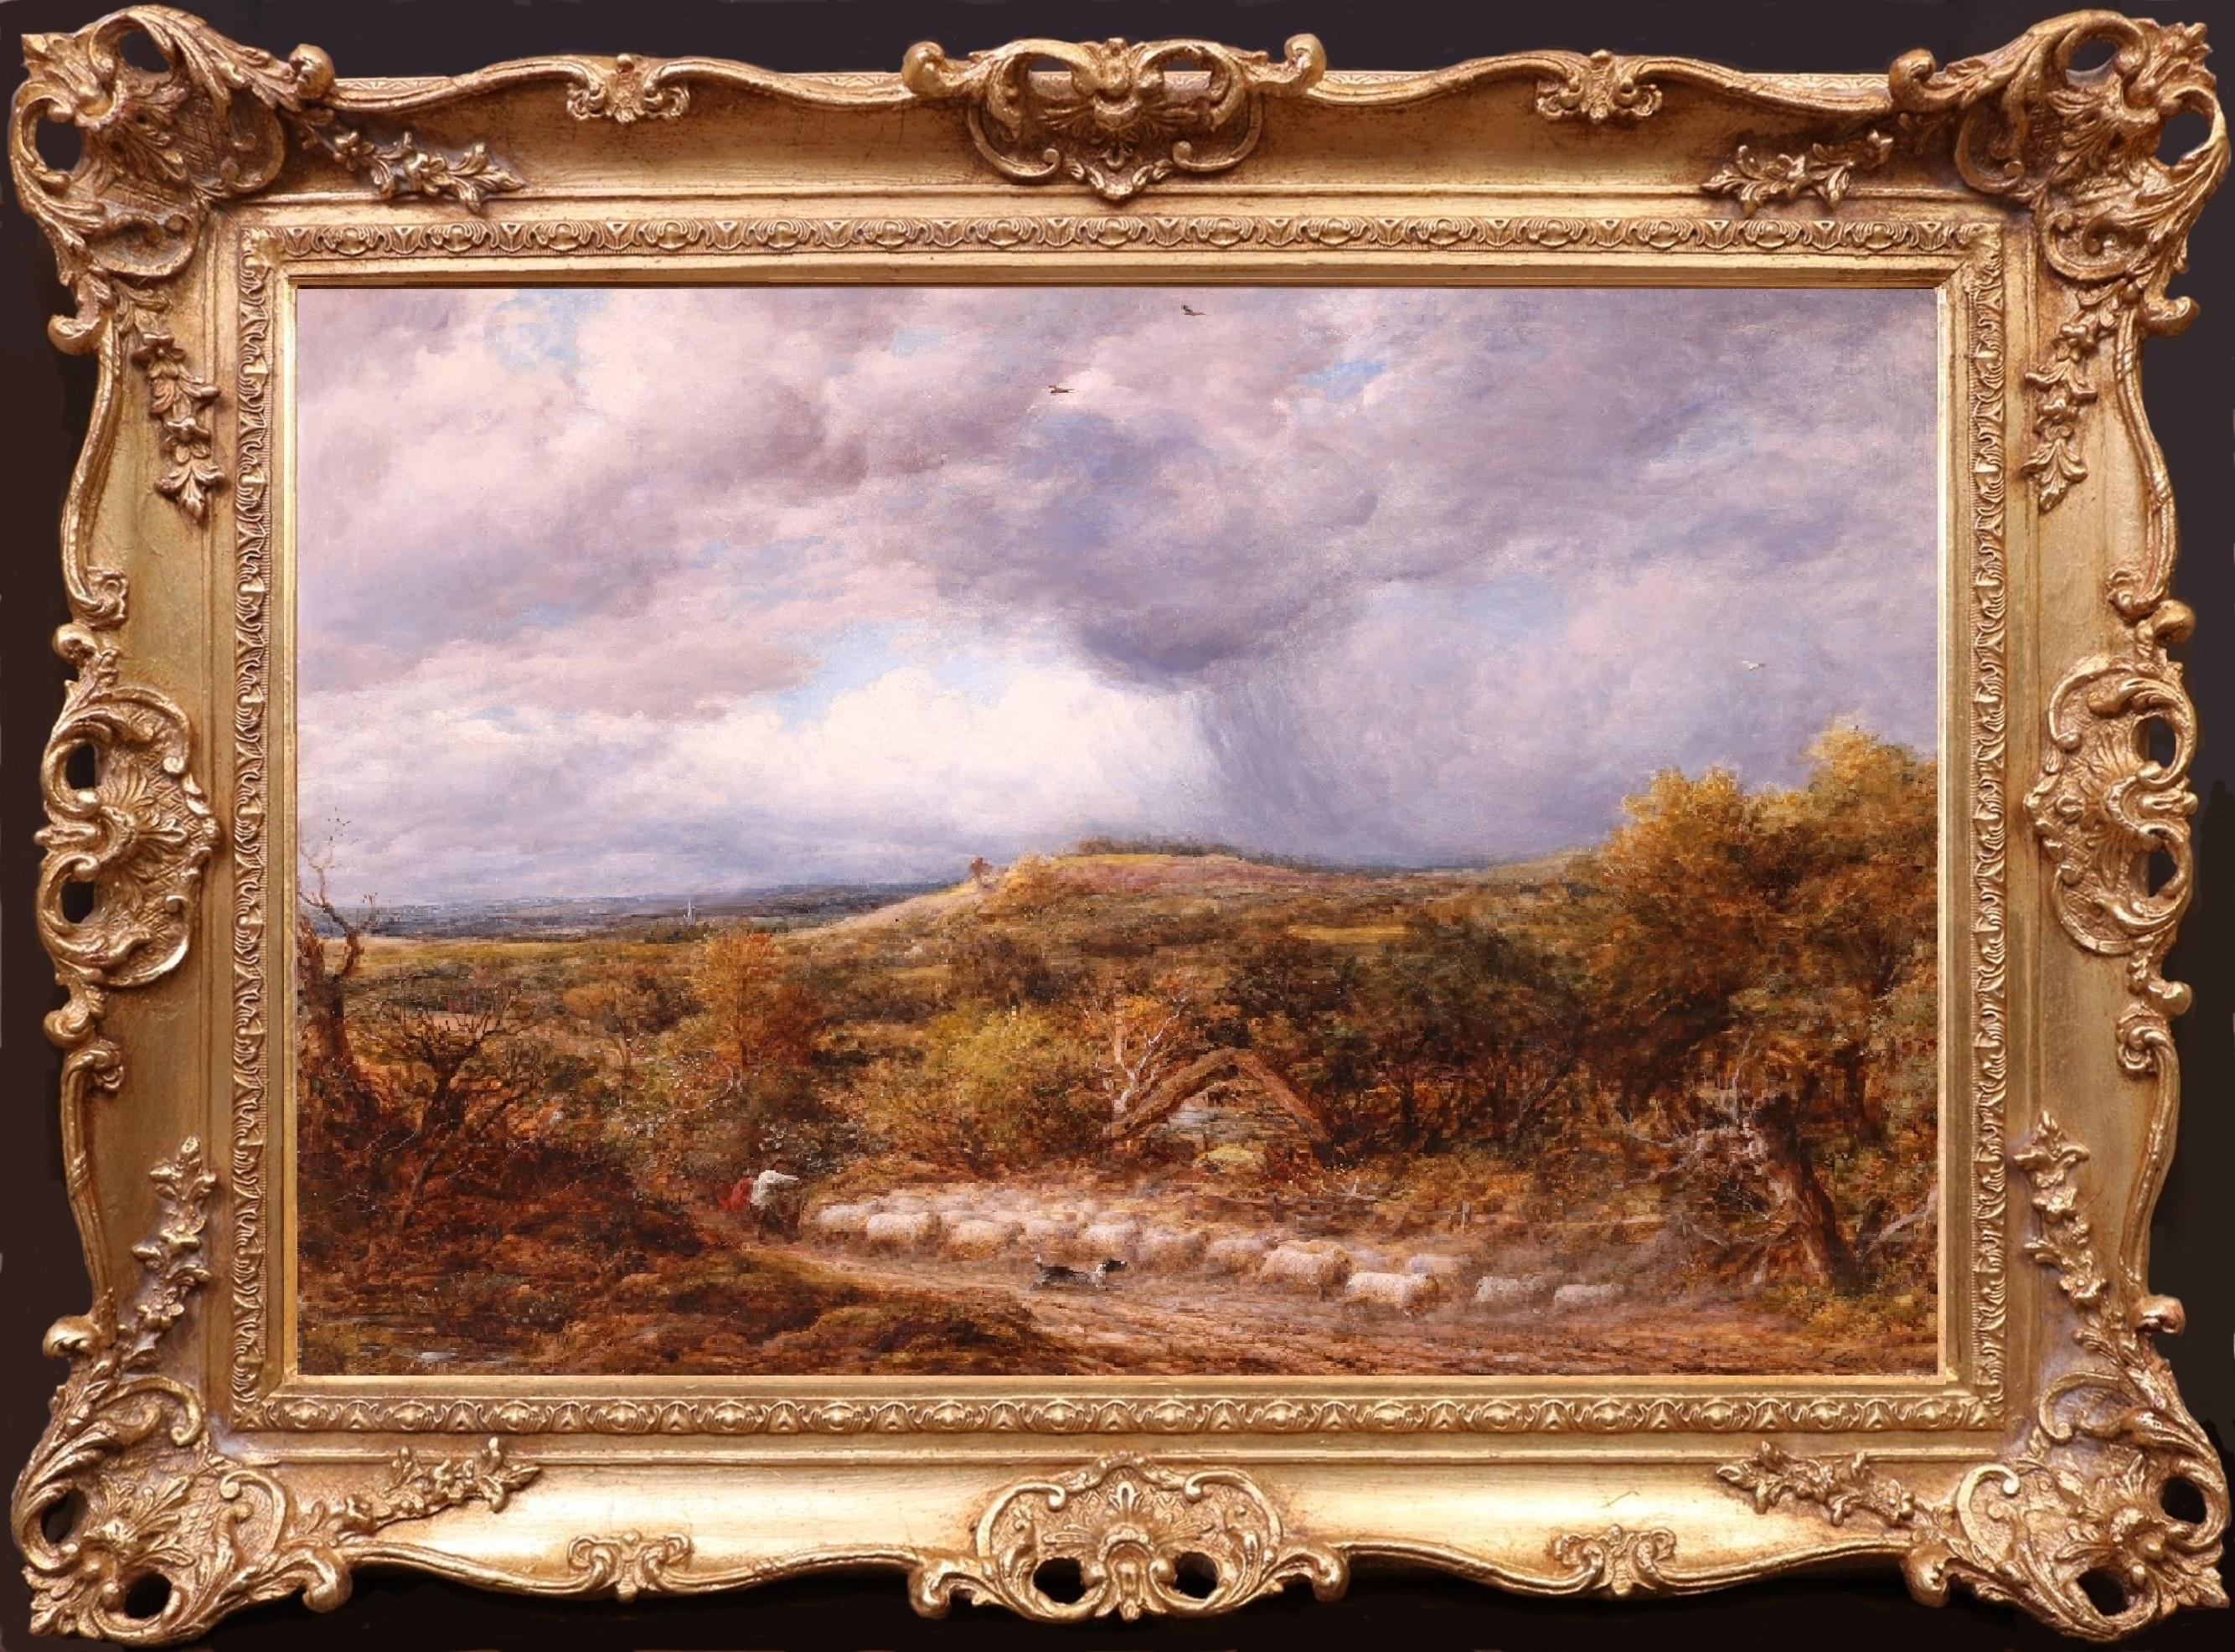 ‘Sheep in a Lane’ by John Linnell (1792-1882). The painting is signed by the artist and dated 1863. It is listed in the definitive catalogue of Linnell’s known works compiled by the artist’s biographer Alfred Story in 1892. 

John Linnell exhibited